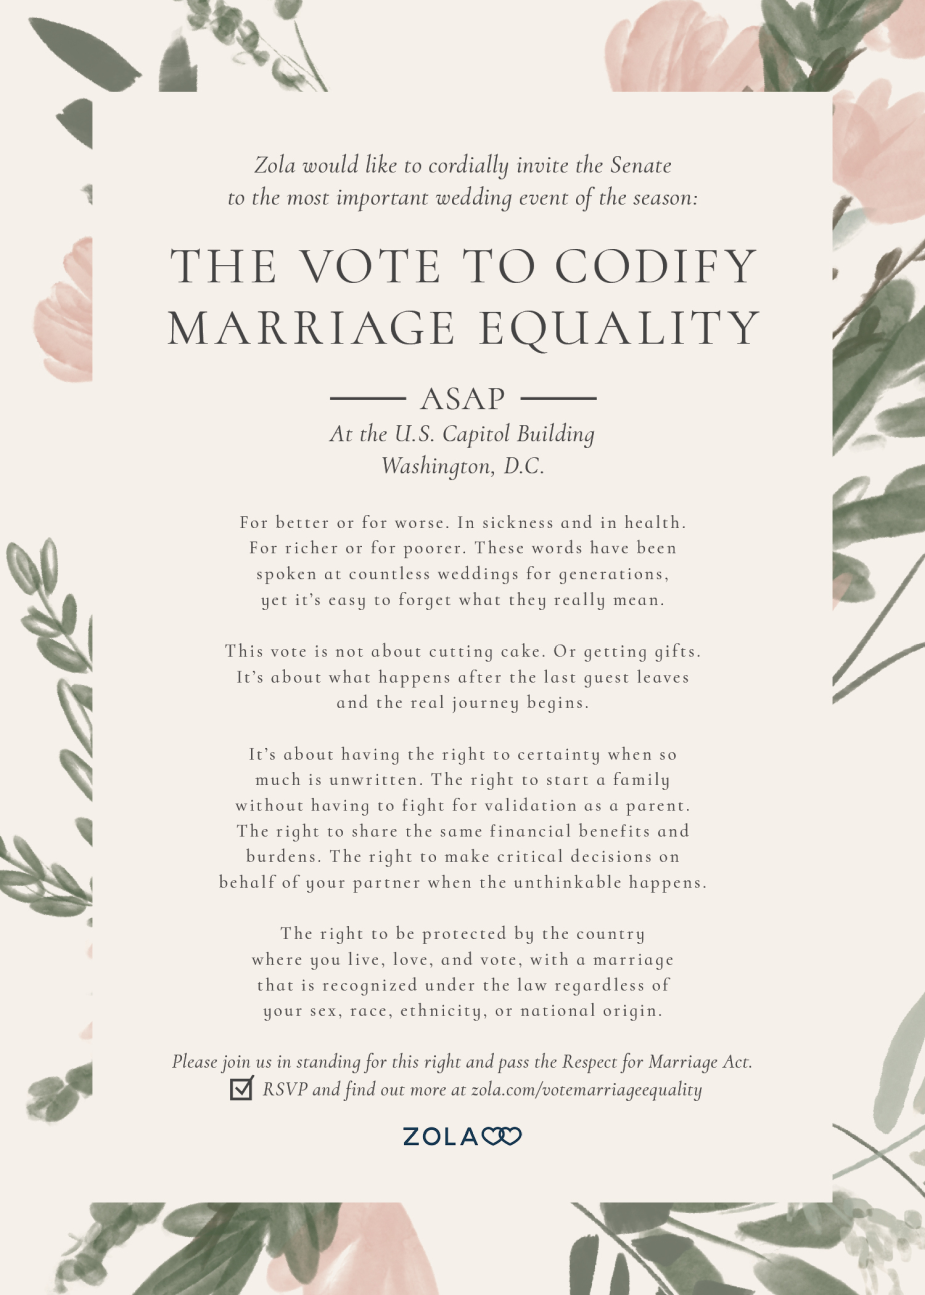 Zola Is Sending a Wedding Invite to the Entire Senate in Response to the  Respect for Marriage Act